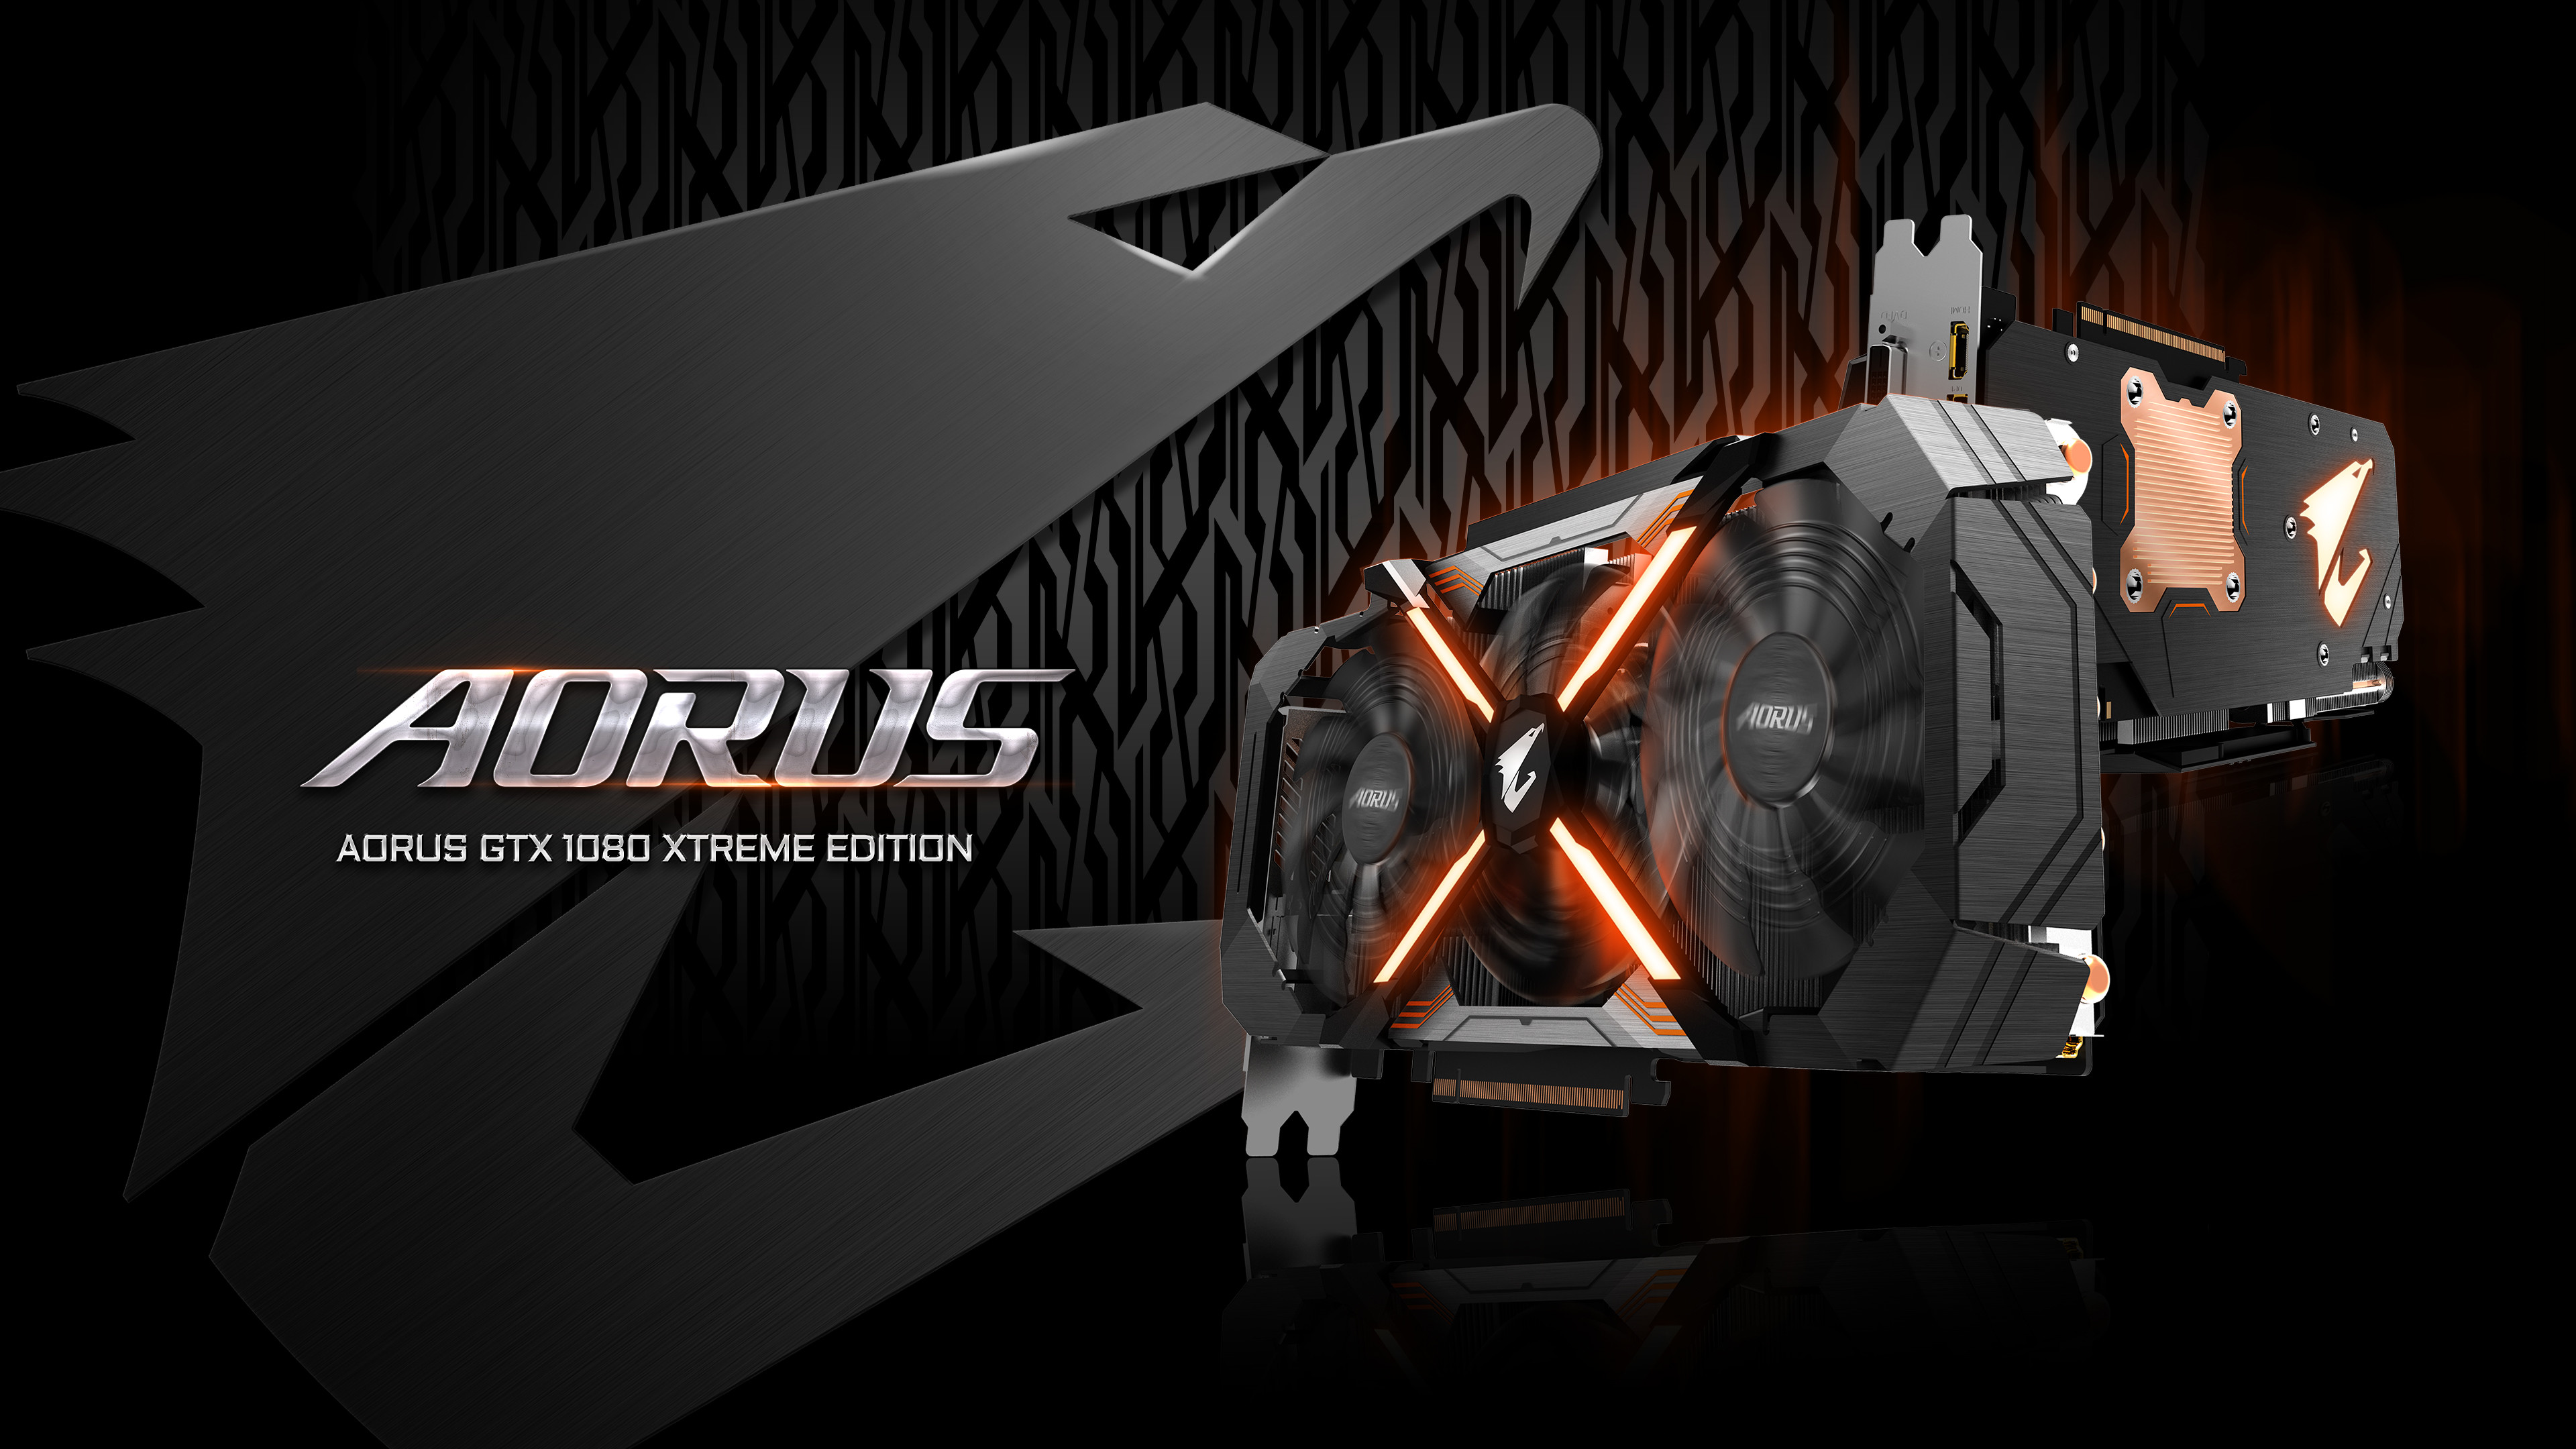 3840x2160 Featuring AORUS GTX 1080 Xtreme Edition. Download